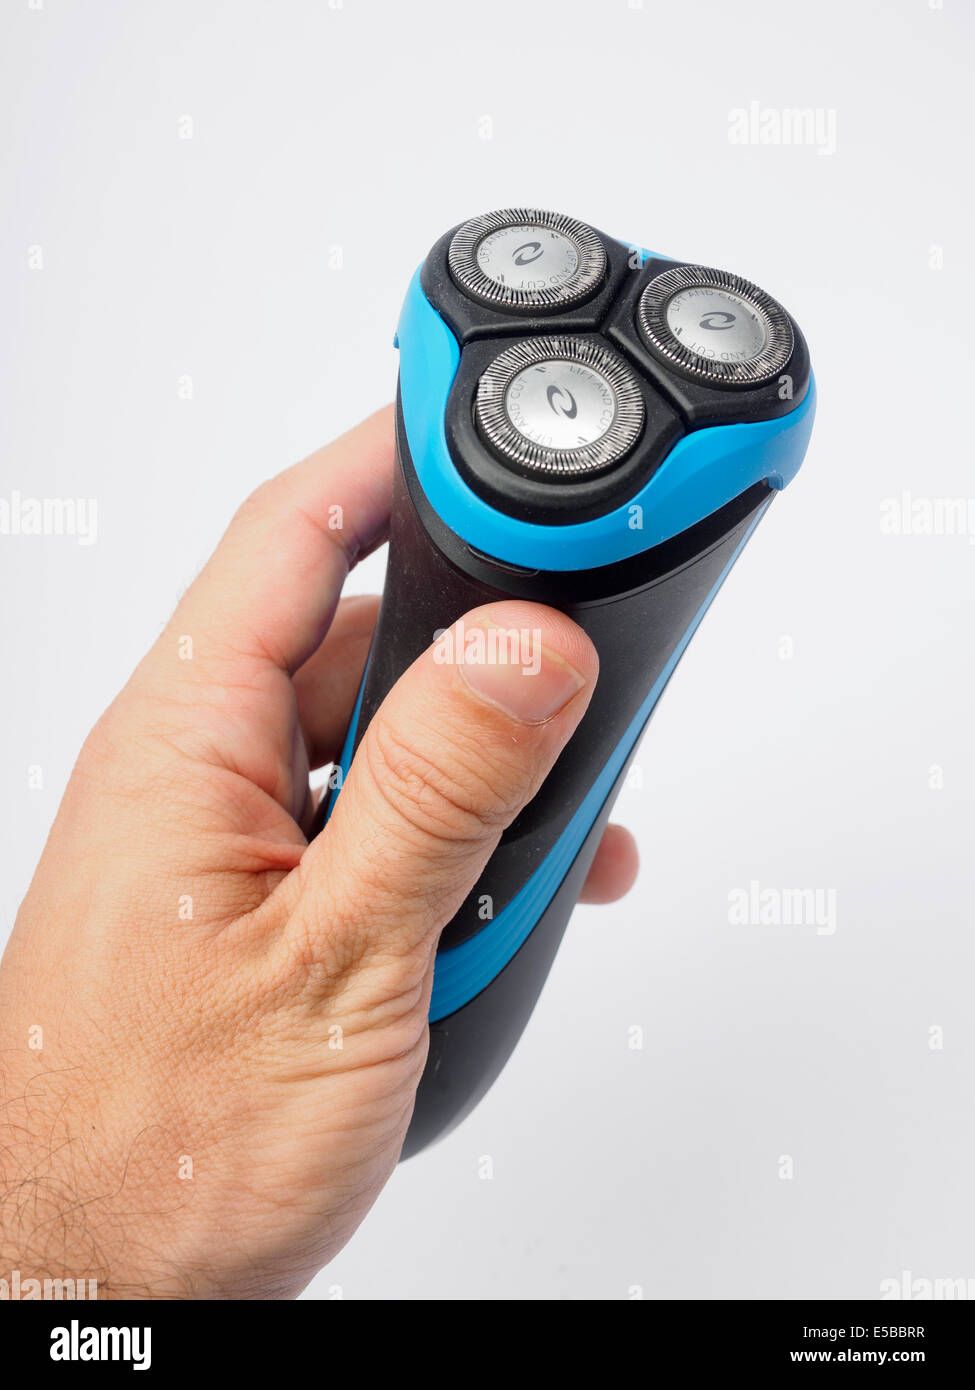 Man holding an electric shaver Stock Photo